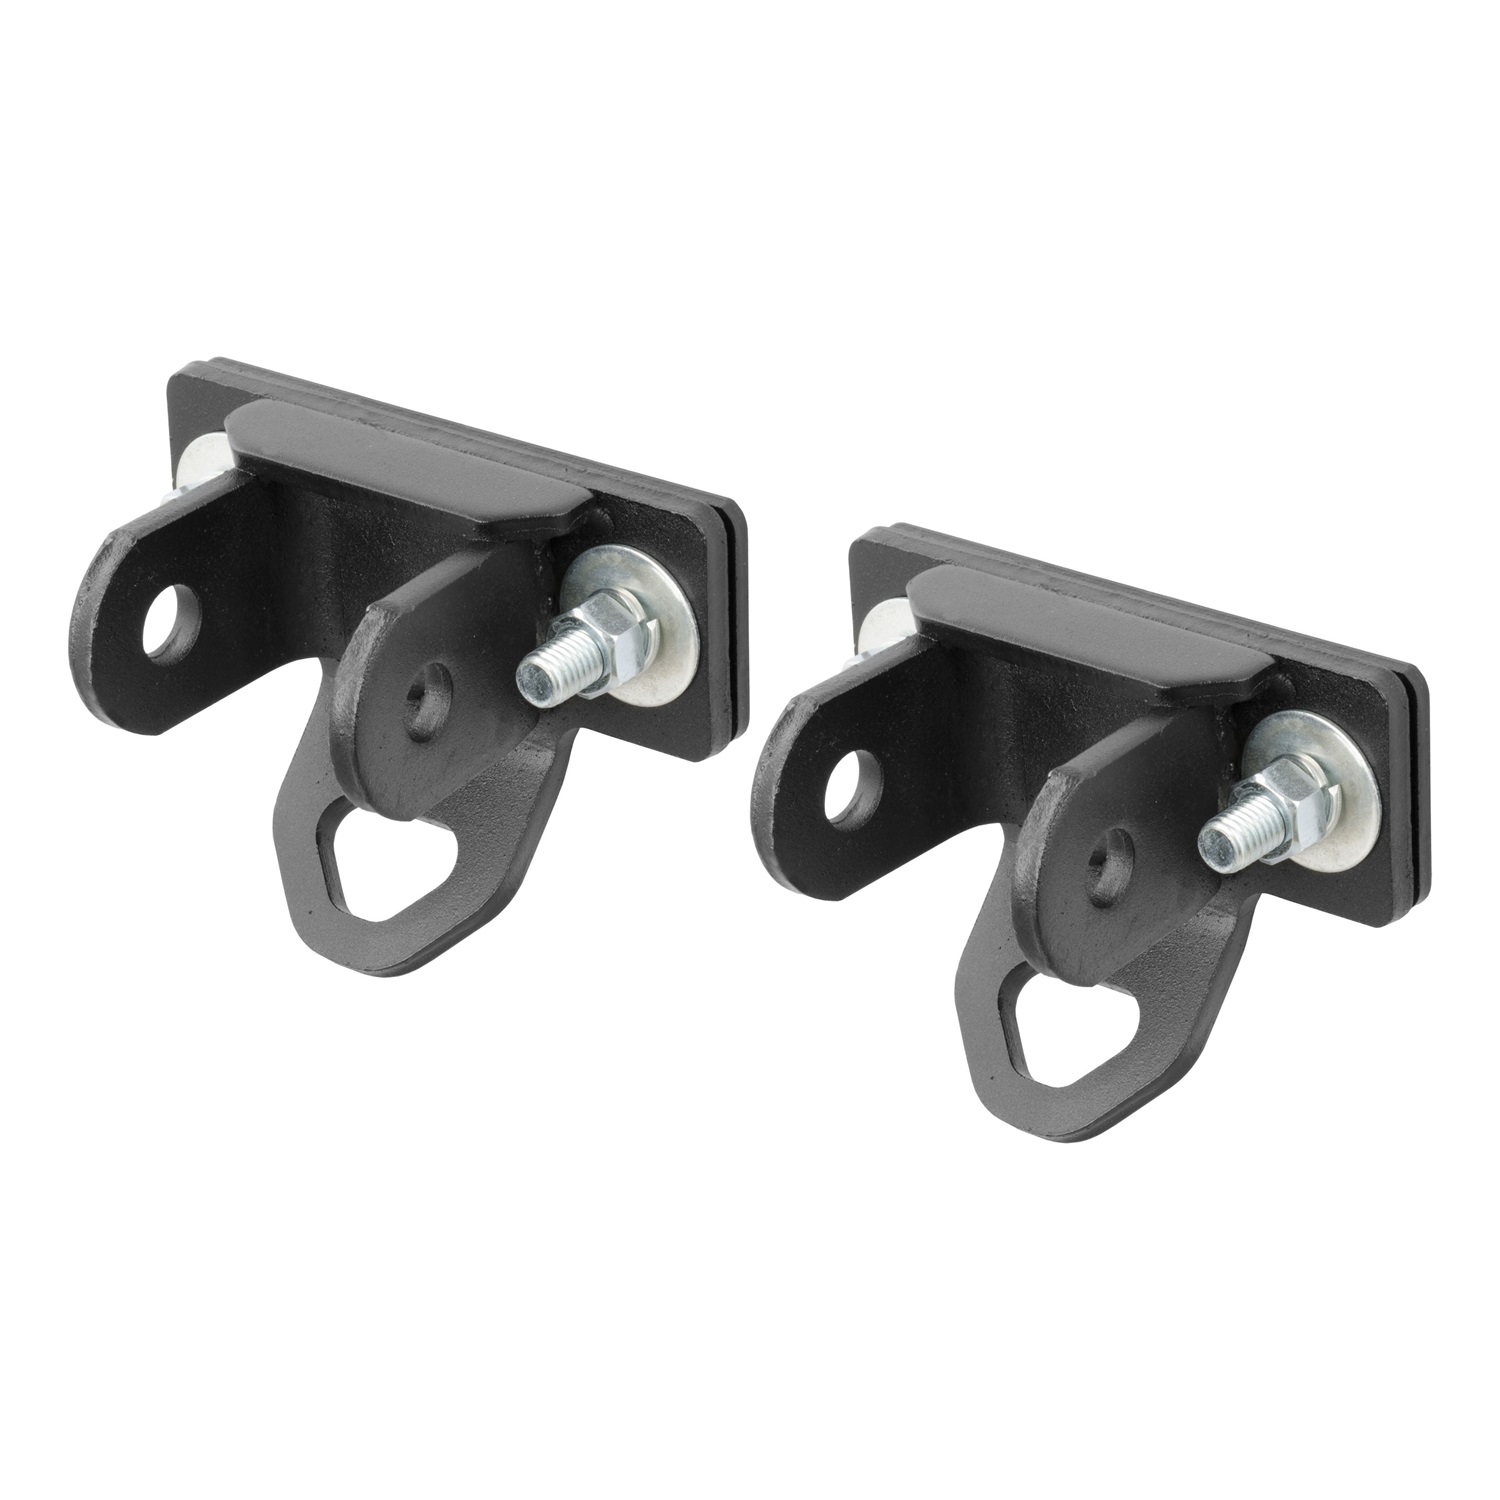 CURT Manufacturing CURT Manufacturing 19747 Adjustable Tow Bar Brackets  Fits